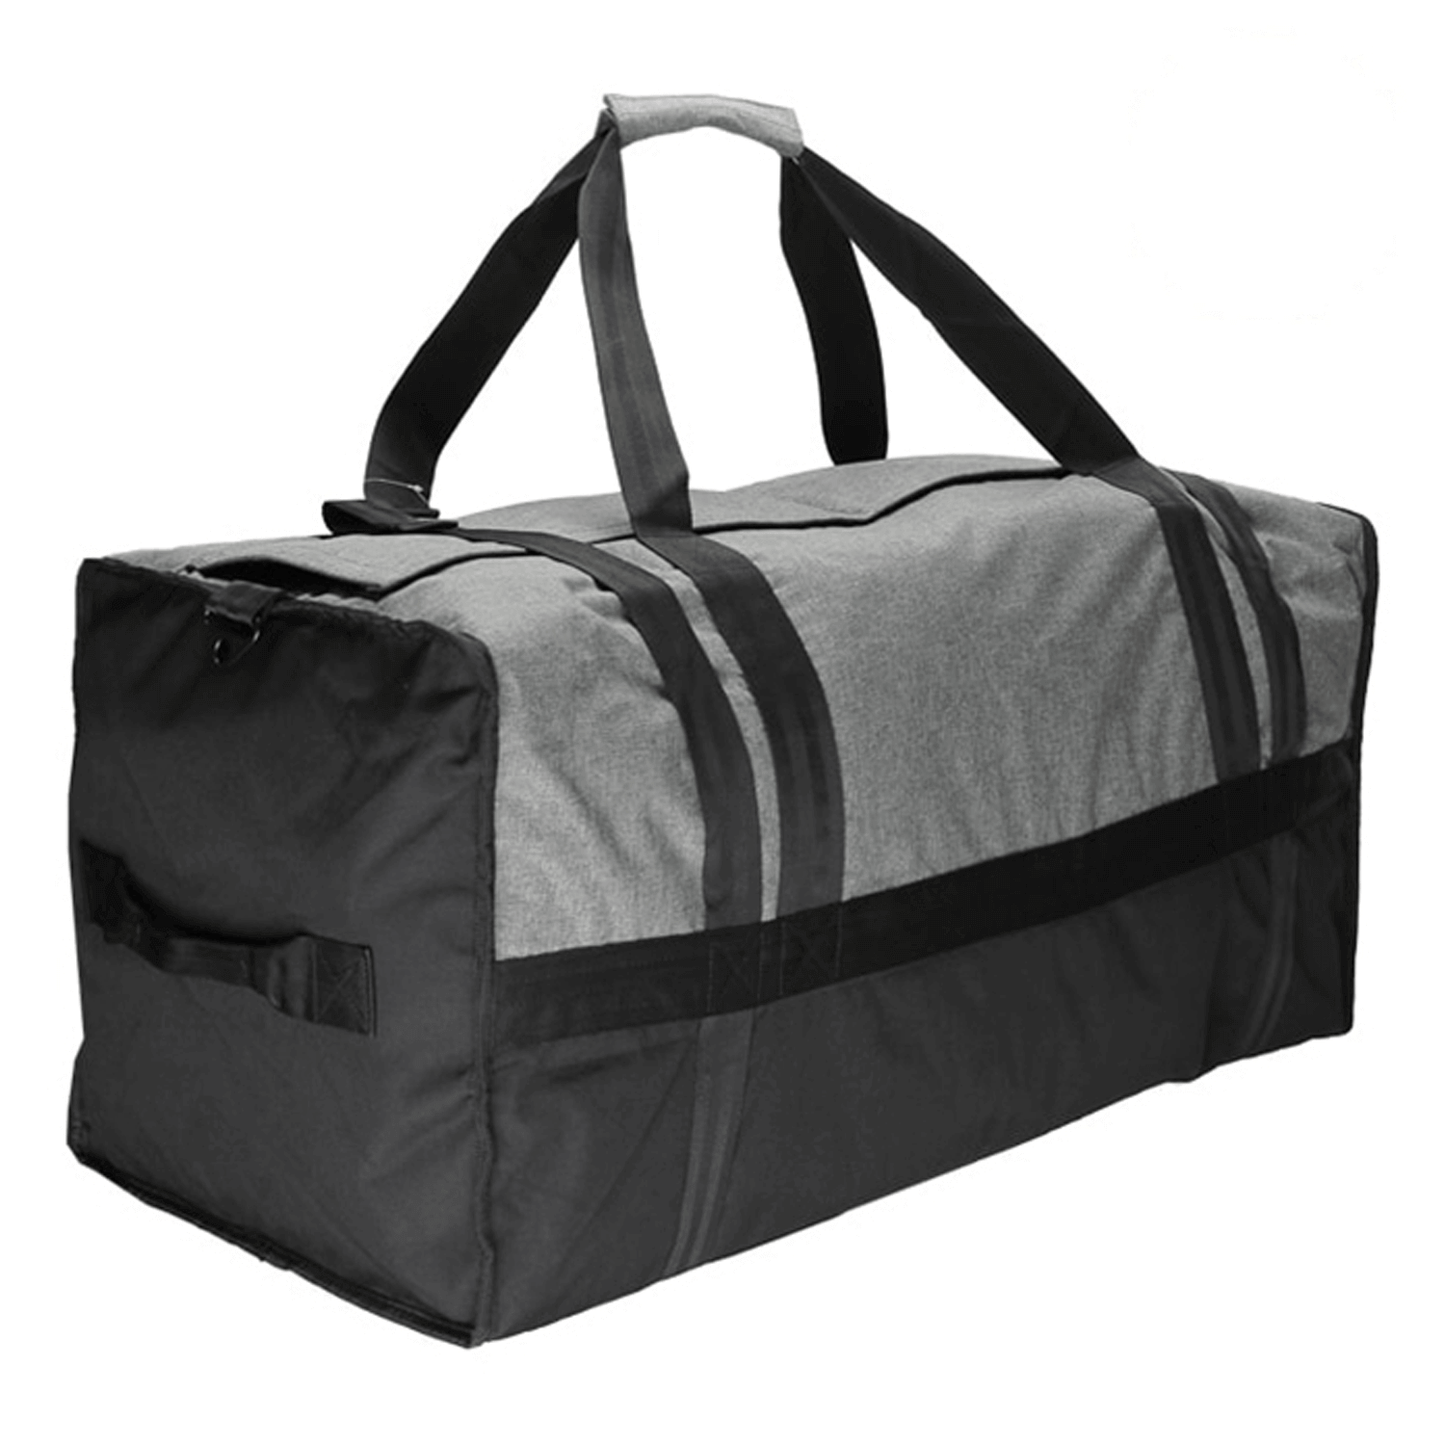 AWOL DAILY XX-Large Gray Square Bag 886161 Harvest & Extraction 853336007928